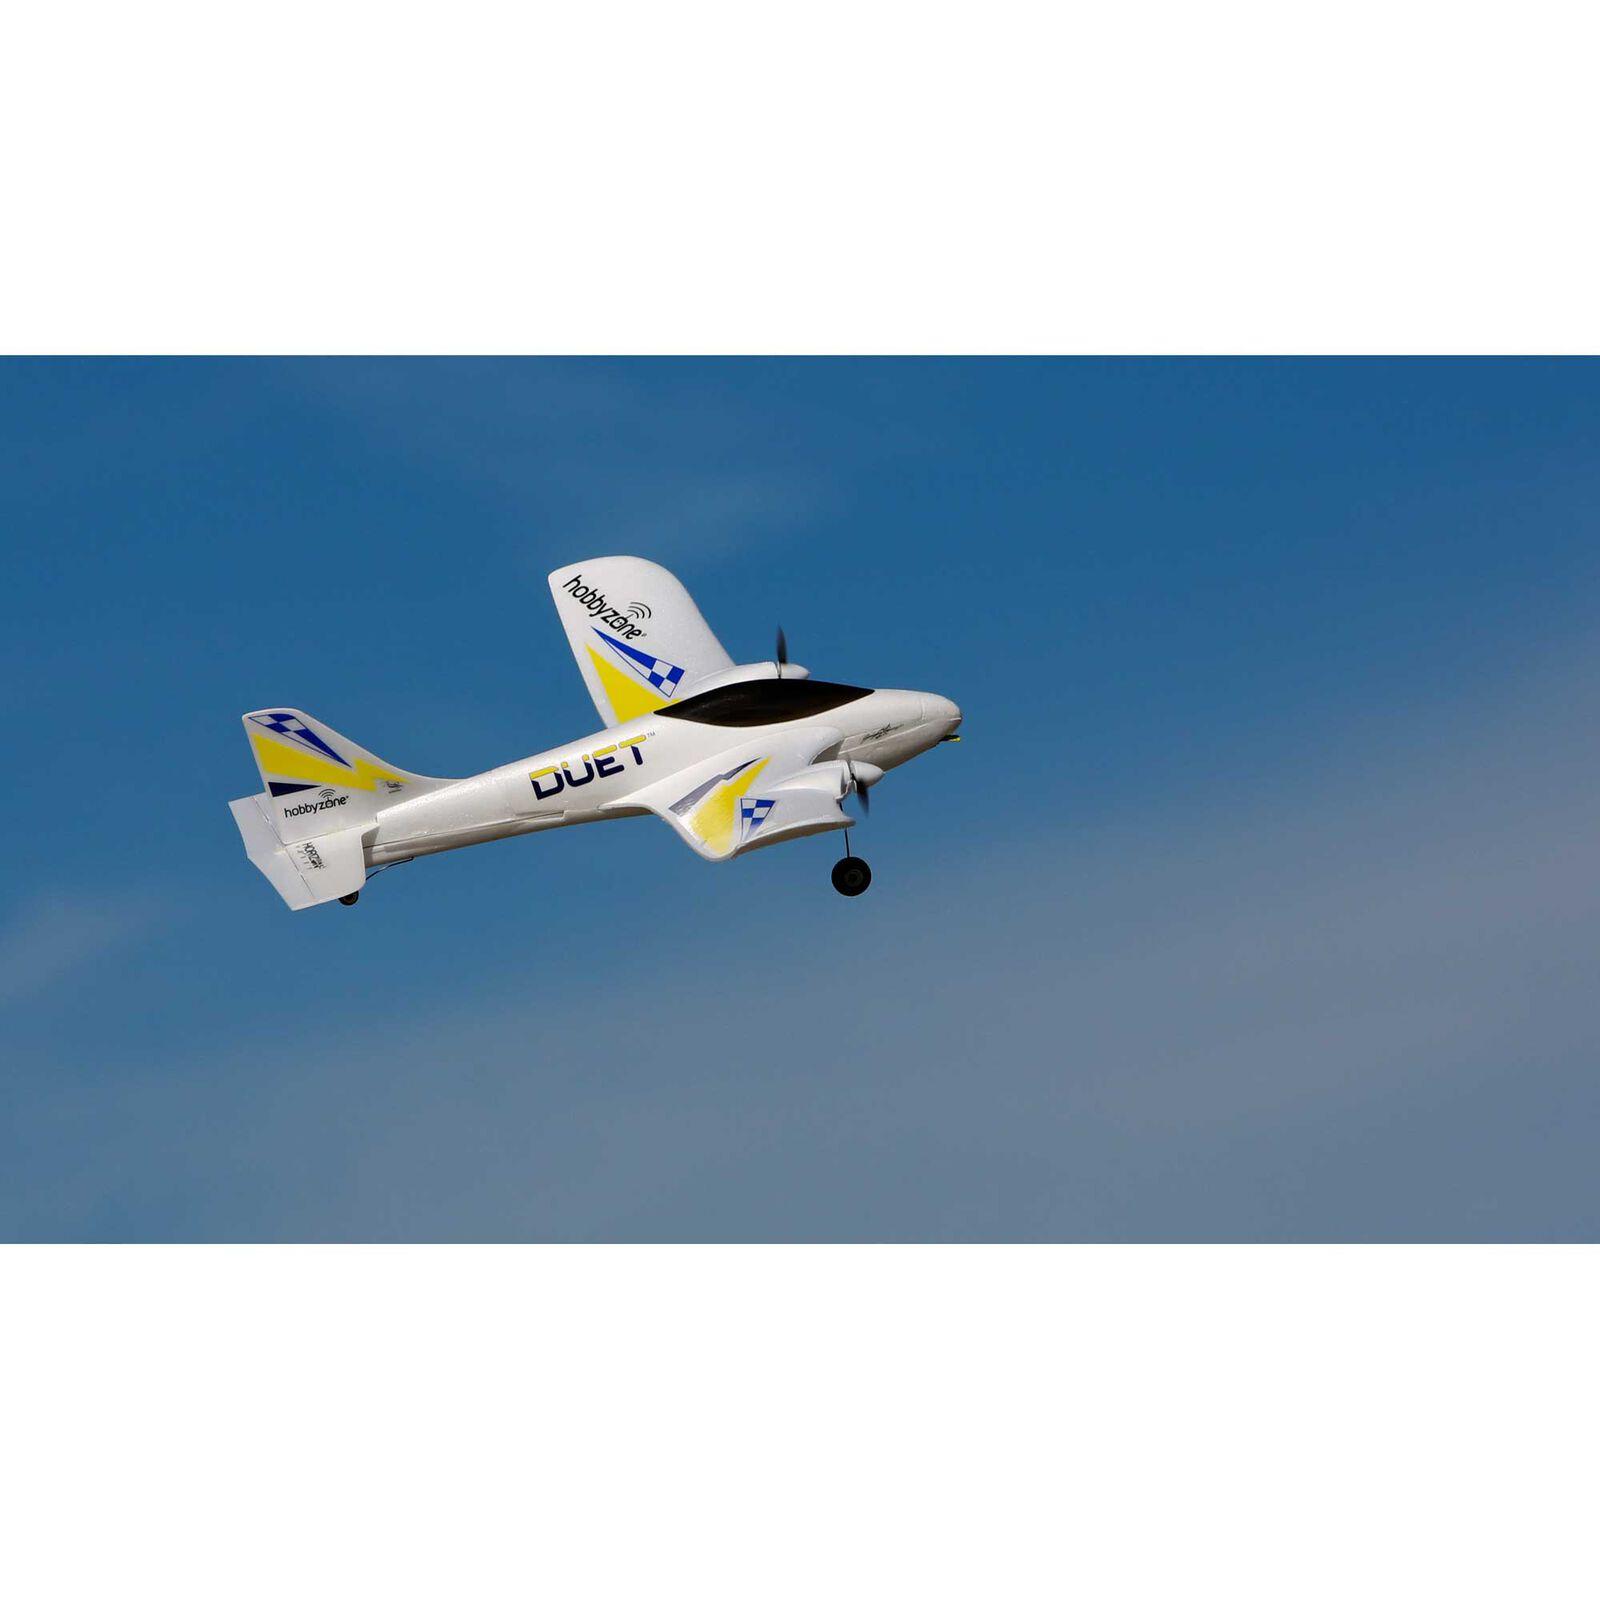 Duet Rtf Rc Plane: Smooth Graduation to Full Piloting Ability